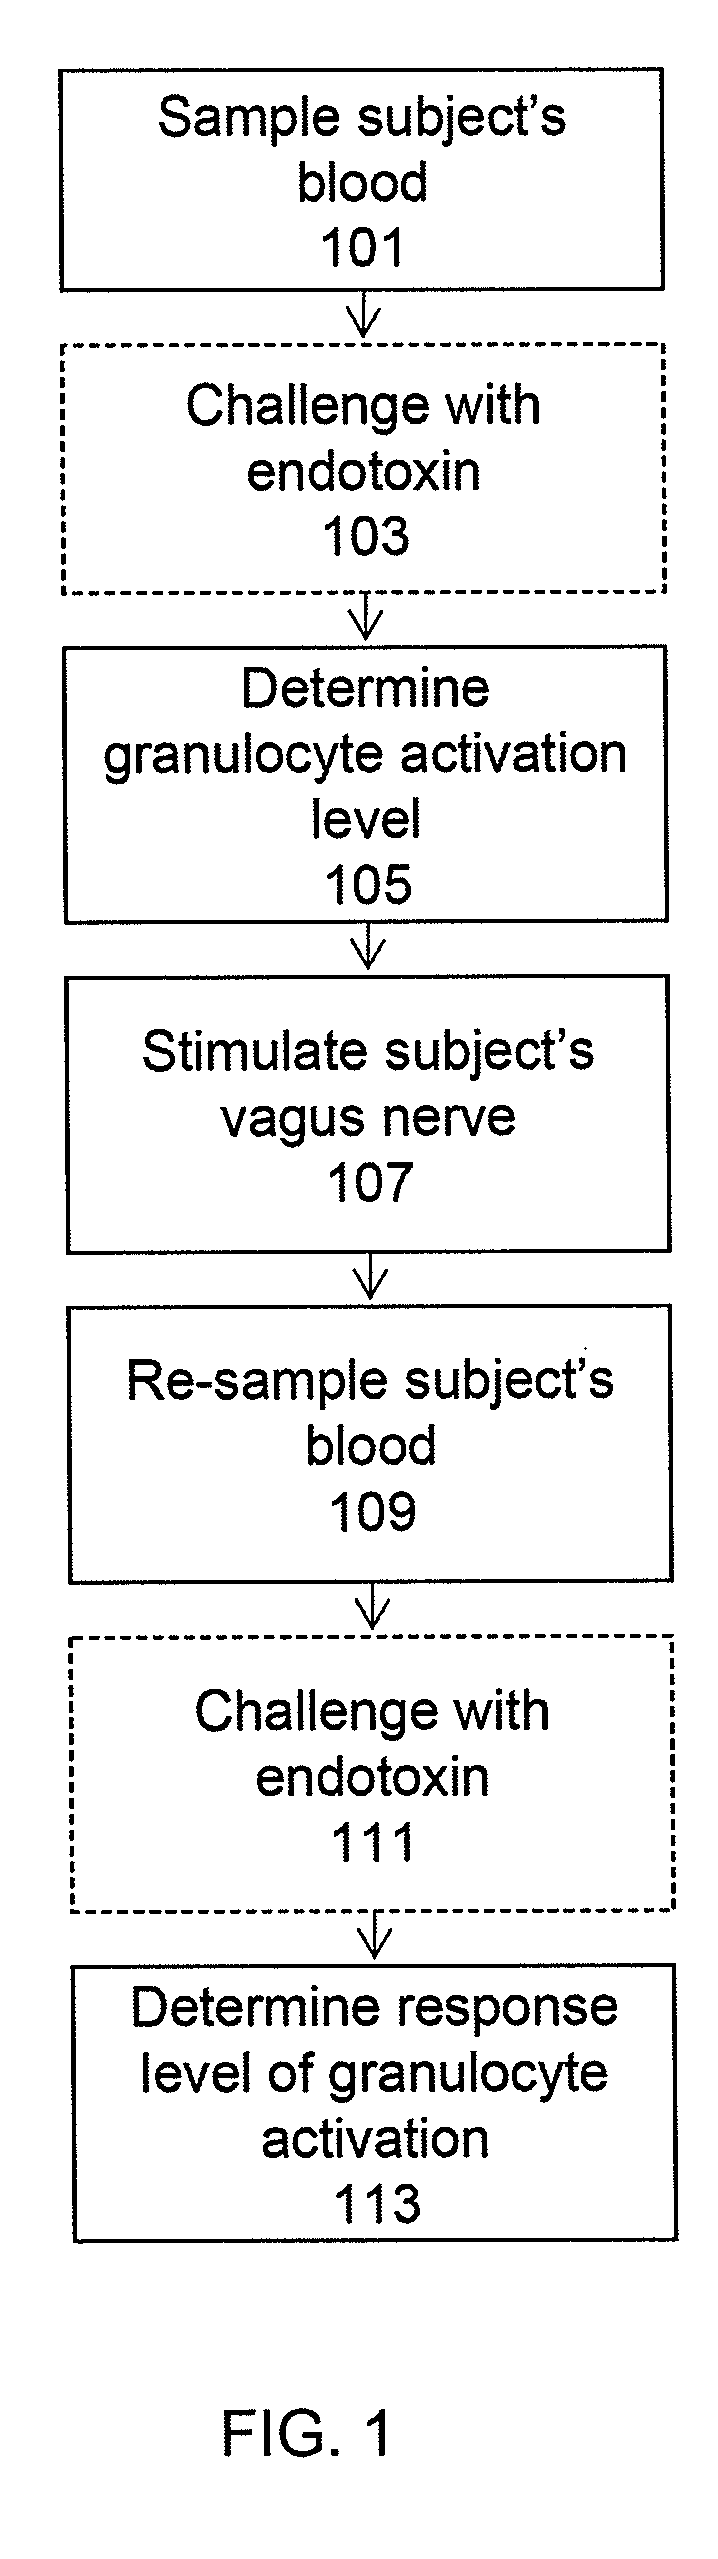 Devices and methods for inhibiting granulocyte activation by neural stimulation